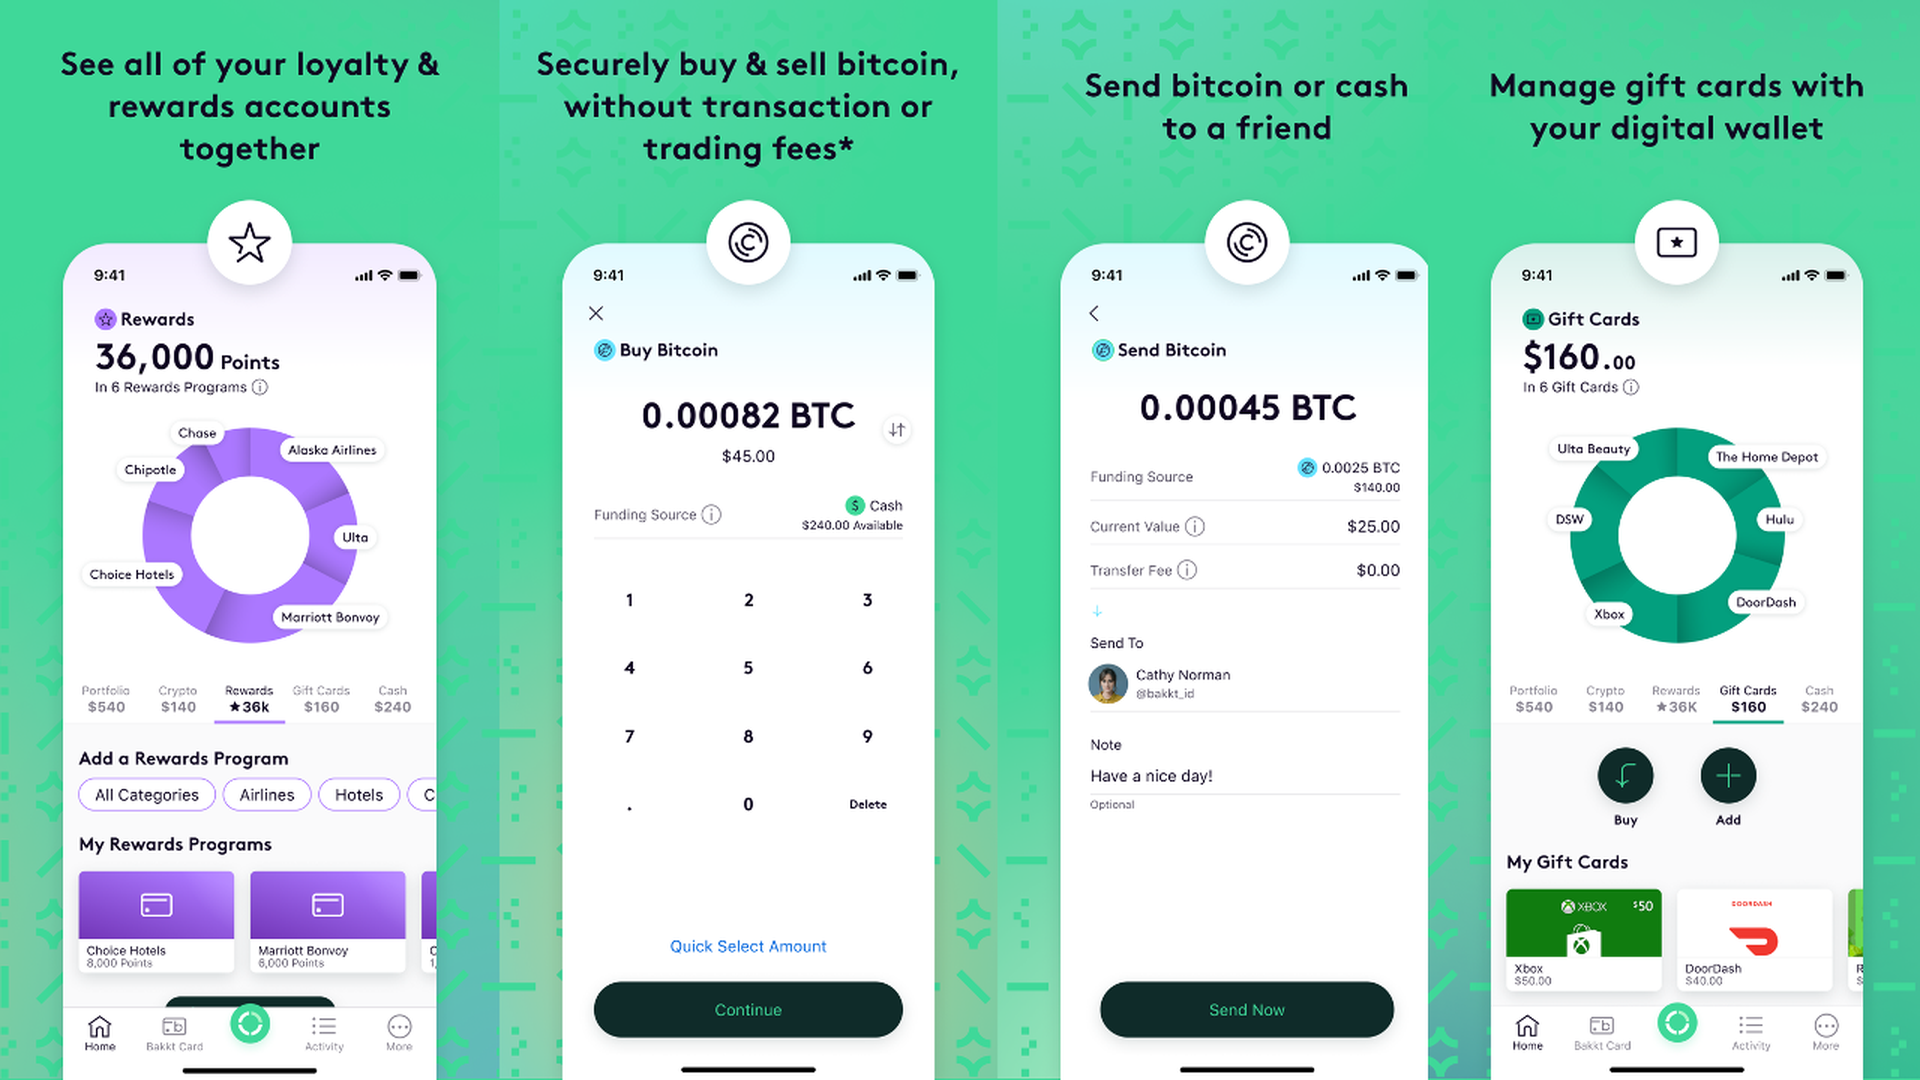 Screenshot of the new app, Bakkt, which allows people to buy, sell and send bitcoin as well as manage their gift cards and rewards programs